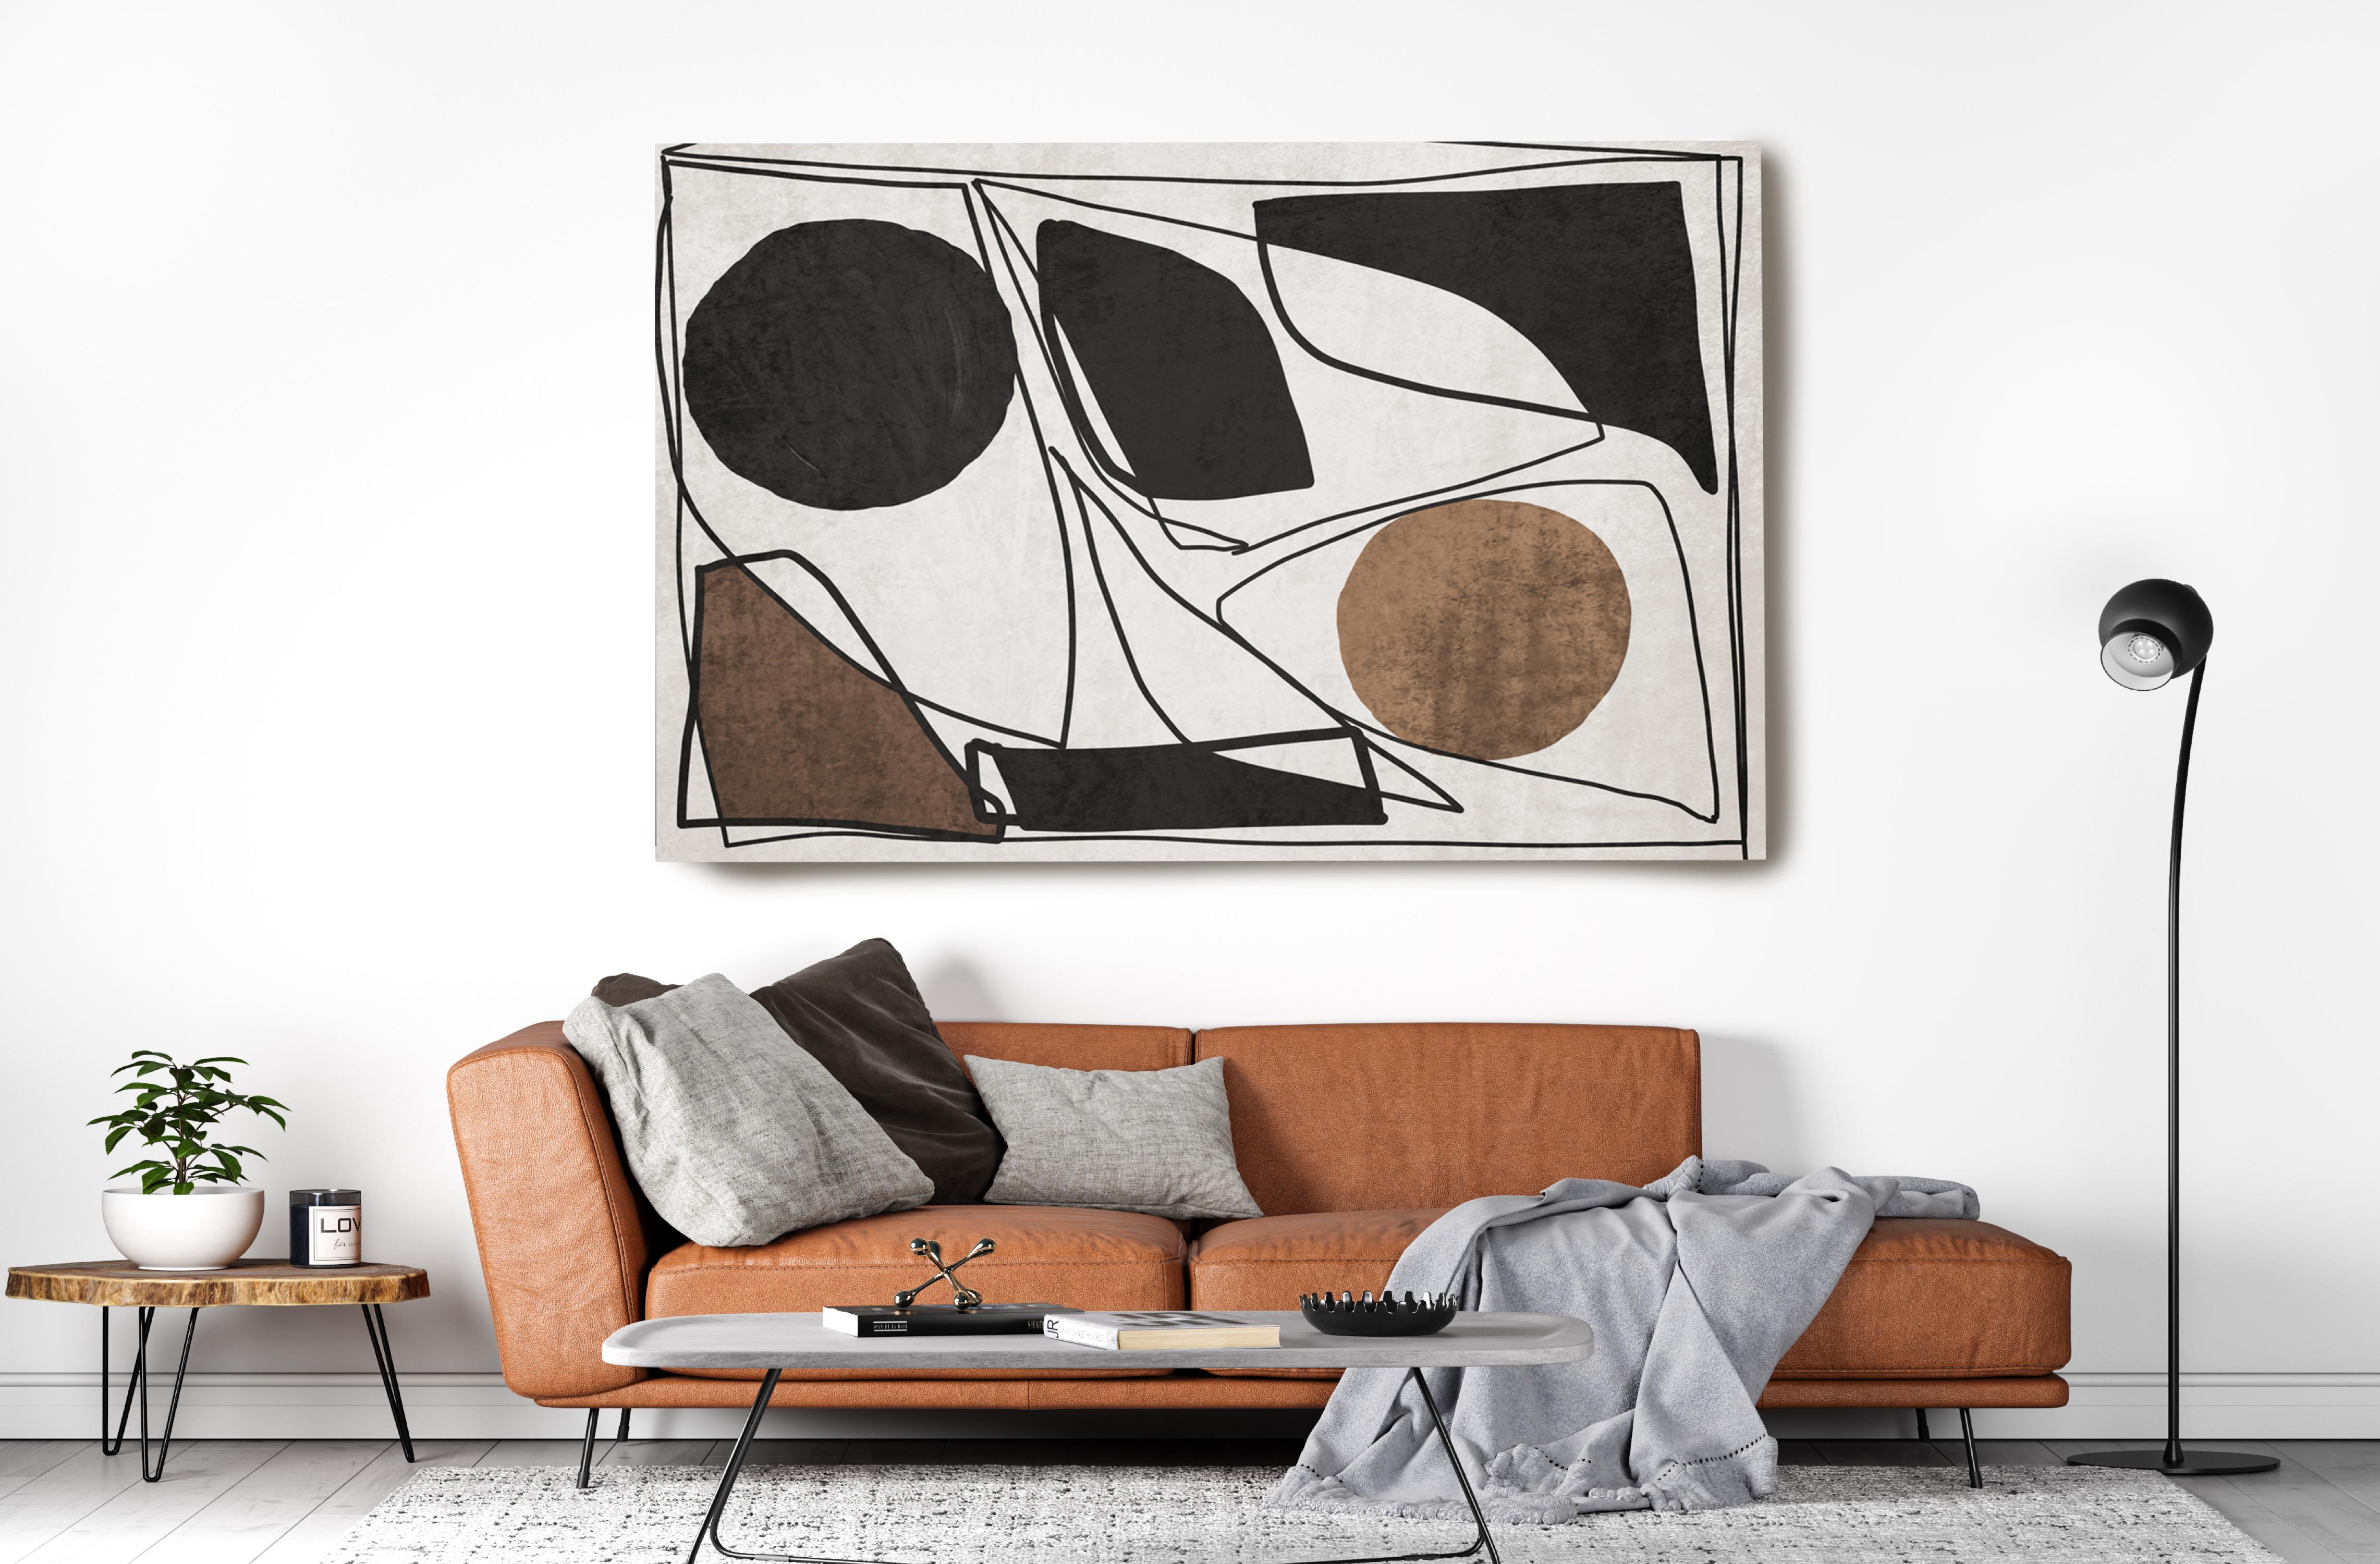 Midcentury Organic Shapes and Lines N-10-103 Mixed Media Canvas Painting 40x60" - Mixed Media Art by Irena Orlov